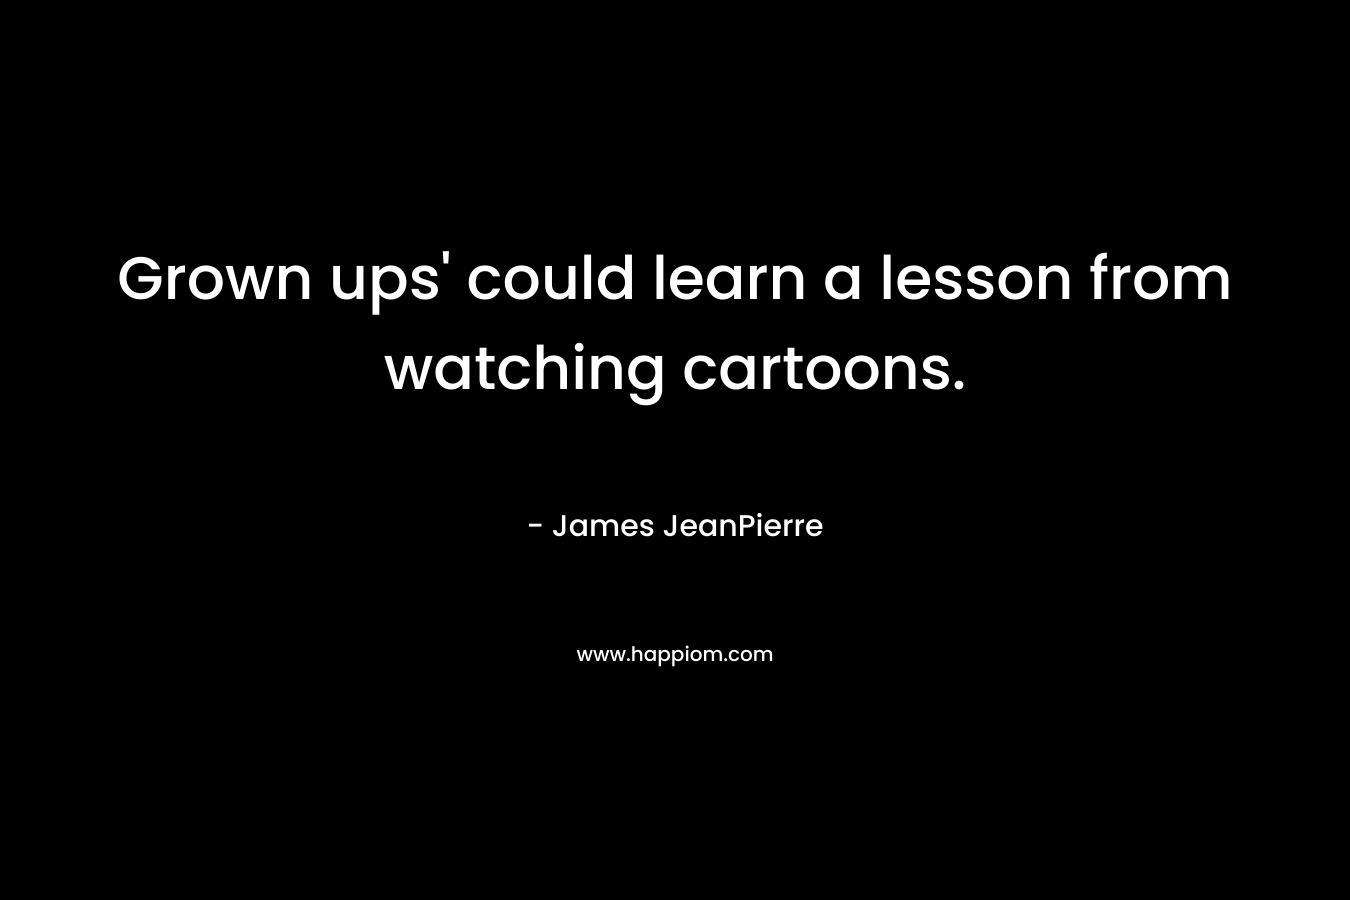 Grown ups’ could learn a lesson from watching cartoons. – James JeanPierre